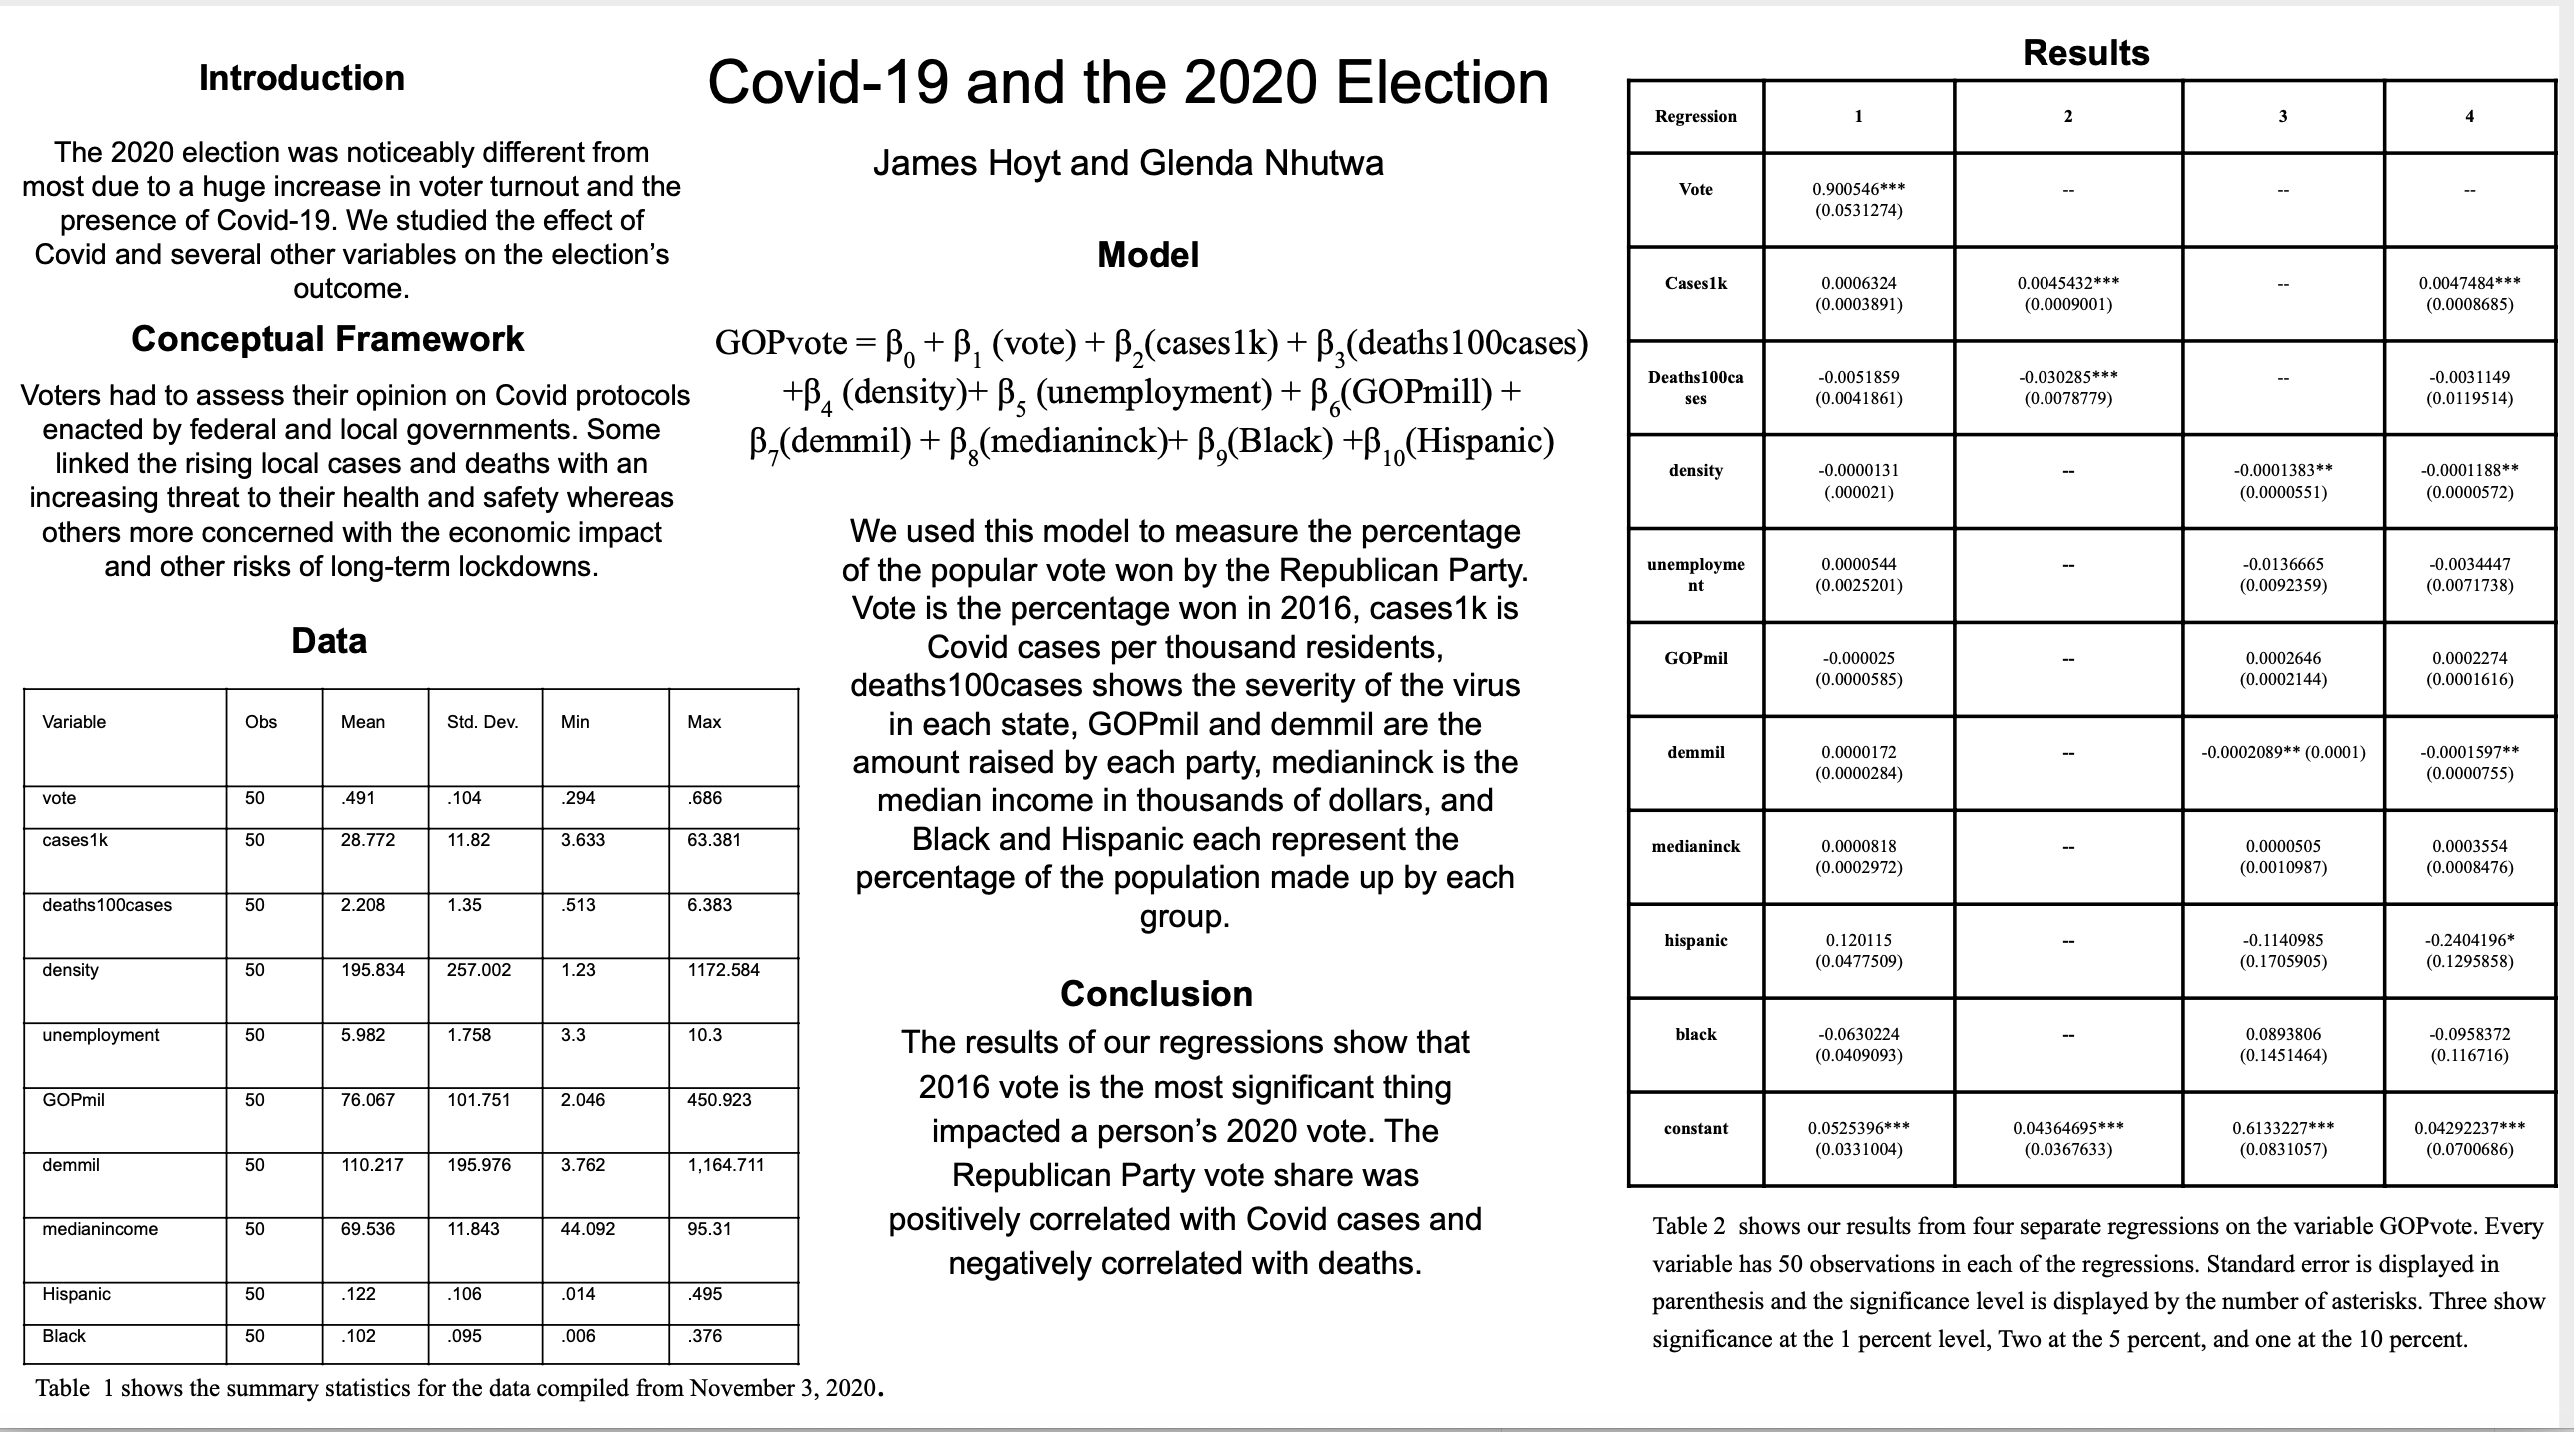 Showcase Image for Covid-19 and the 2020 Election